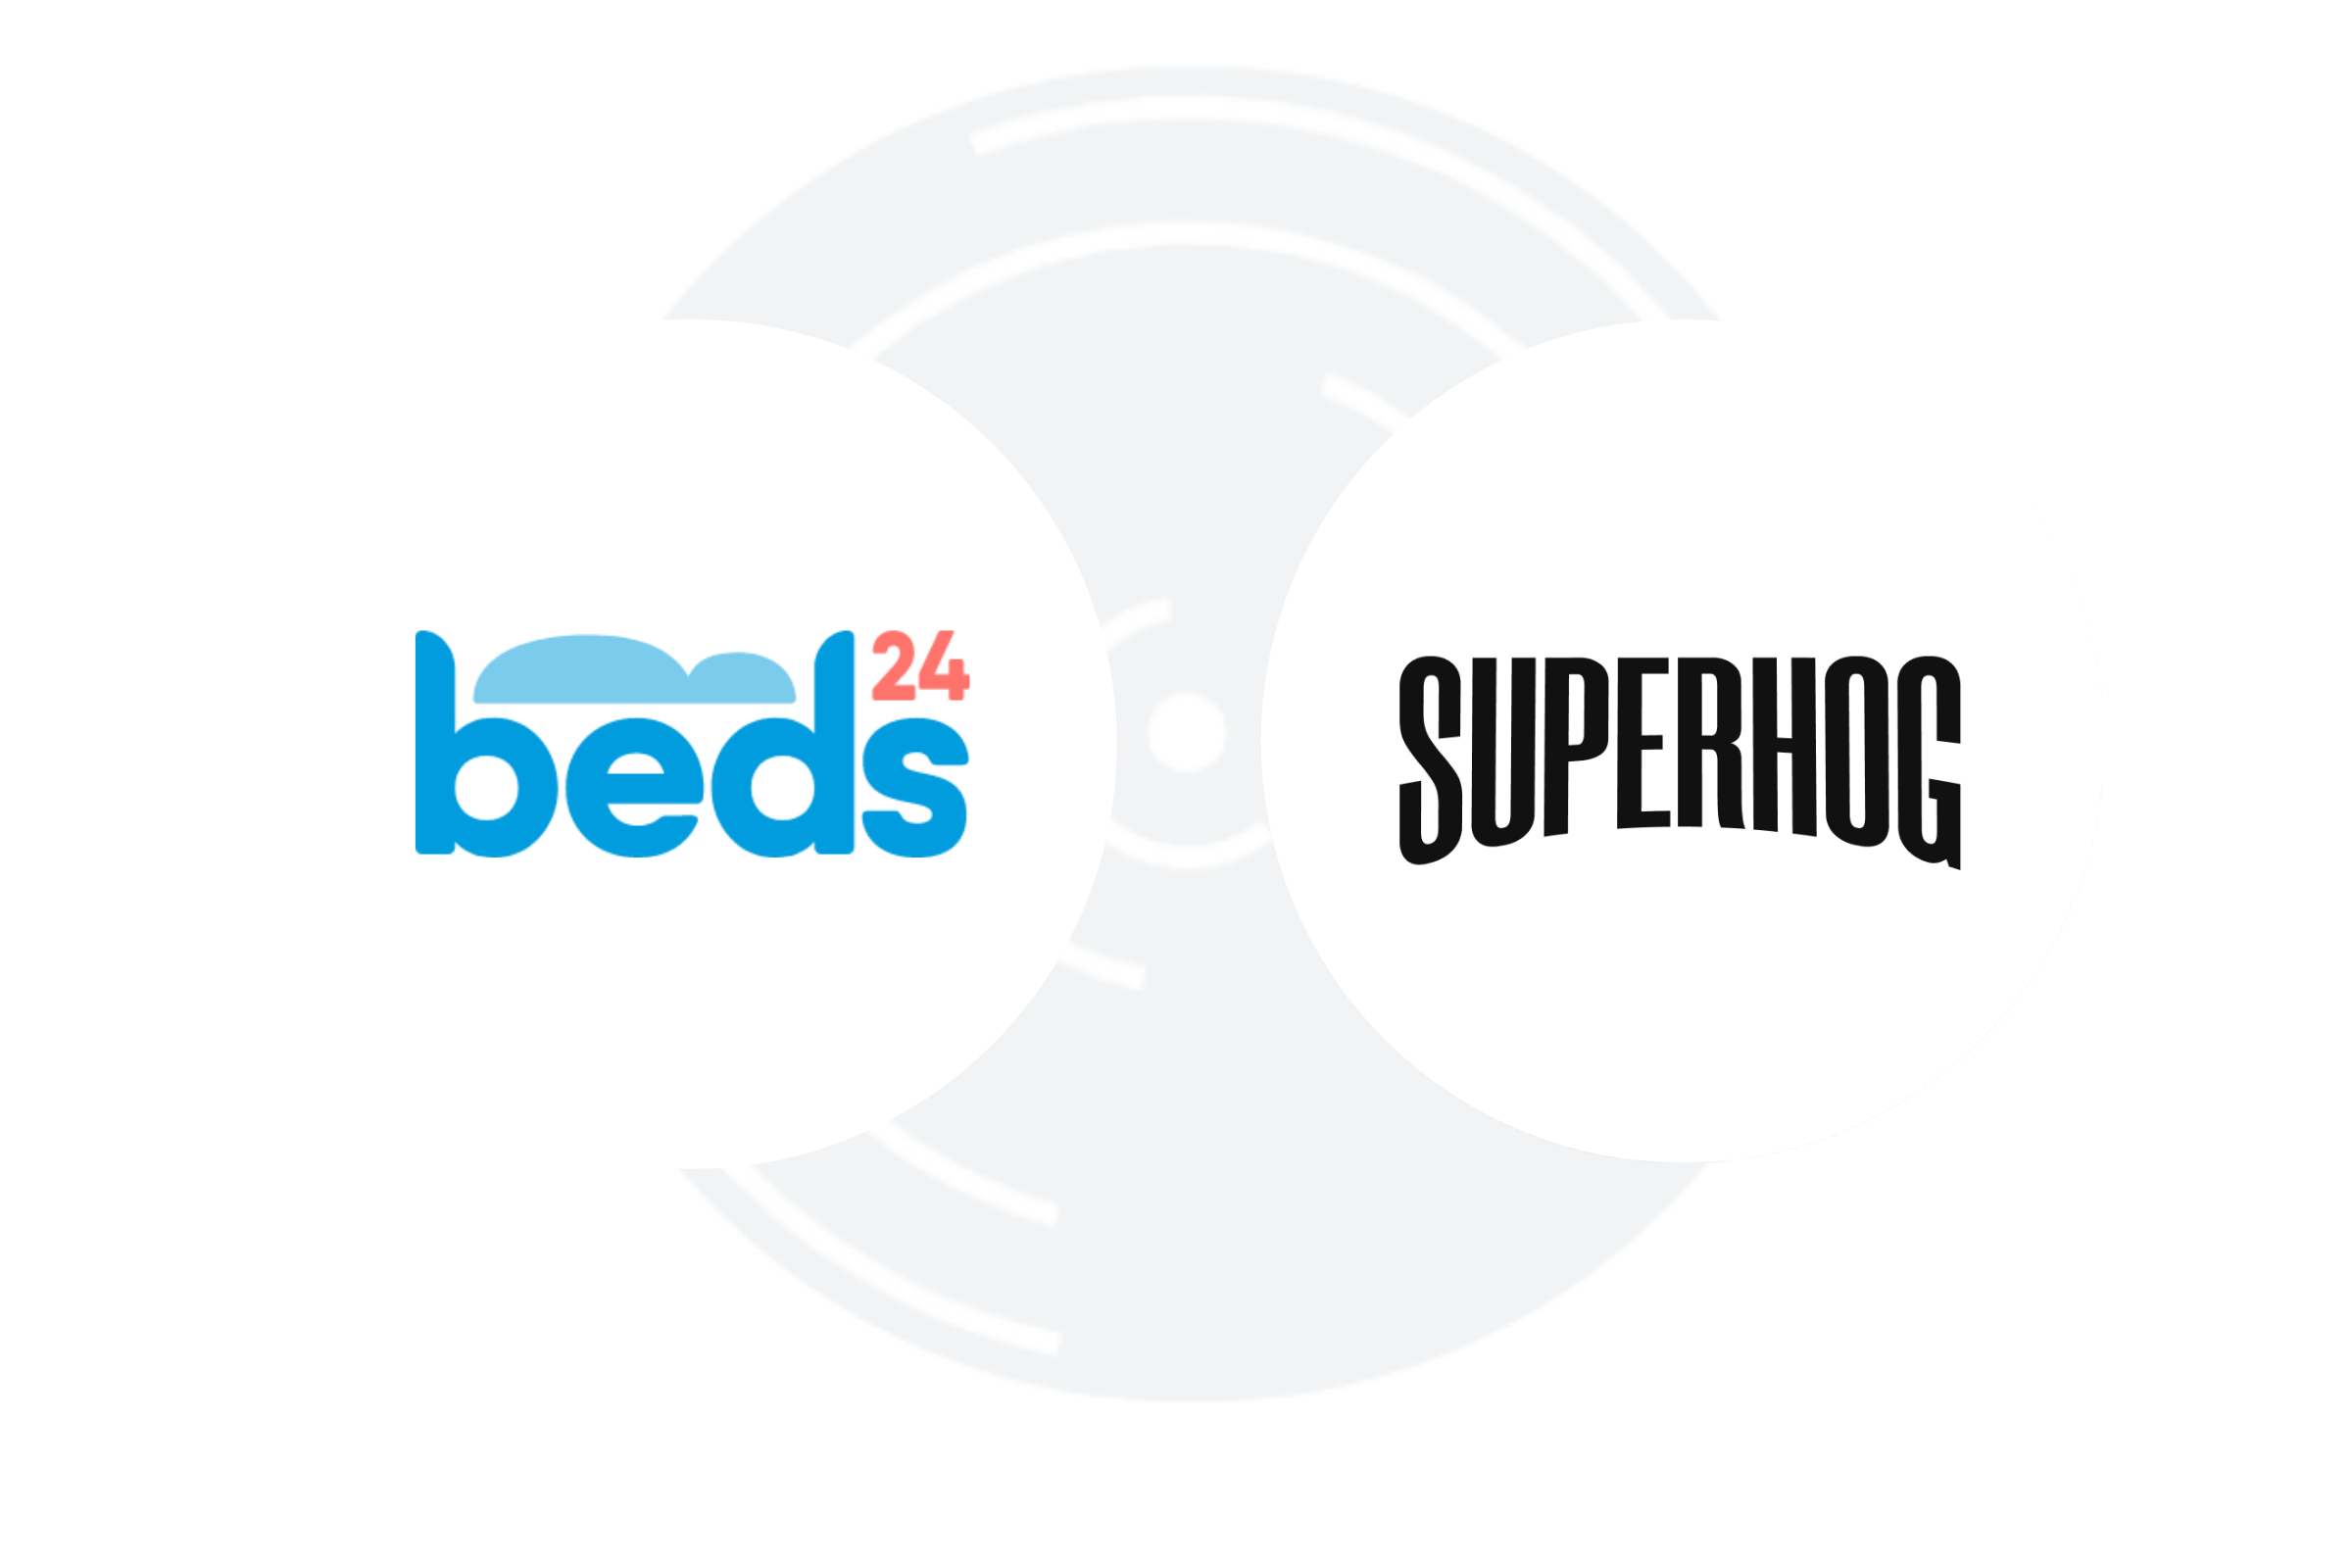 Beds24 landing page